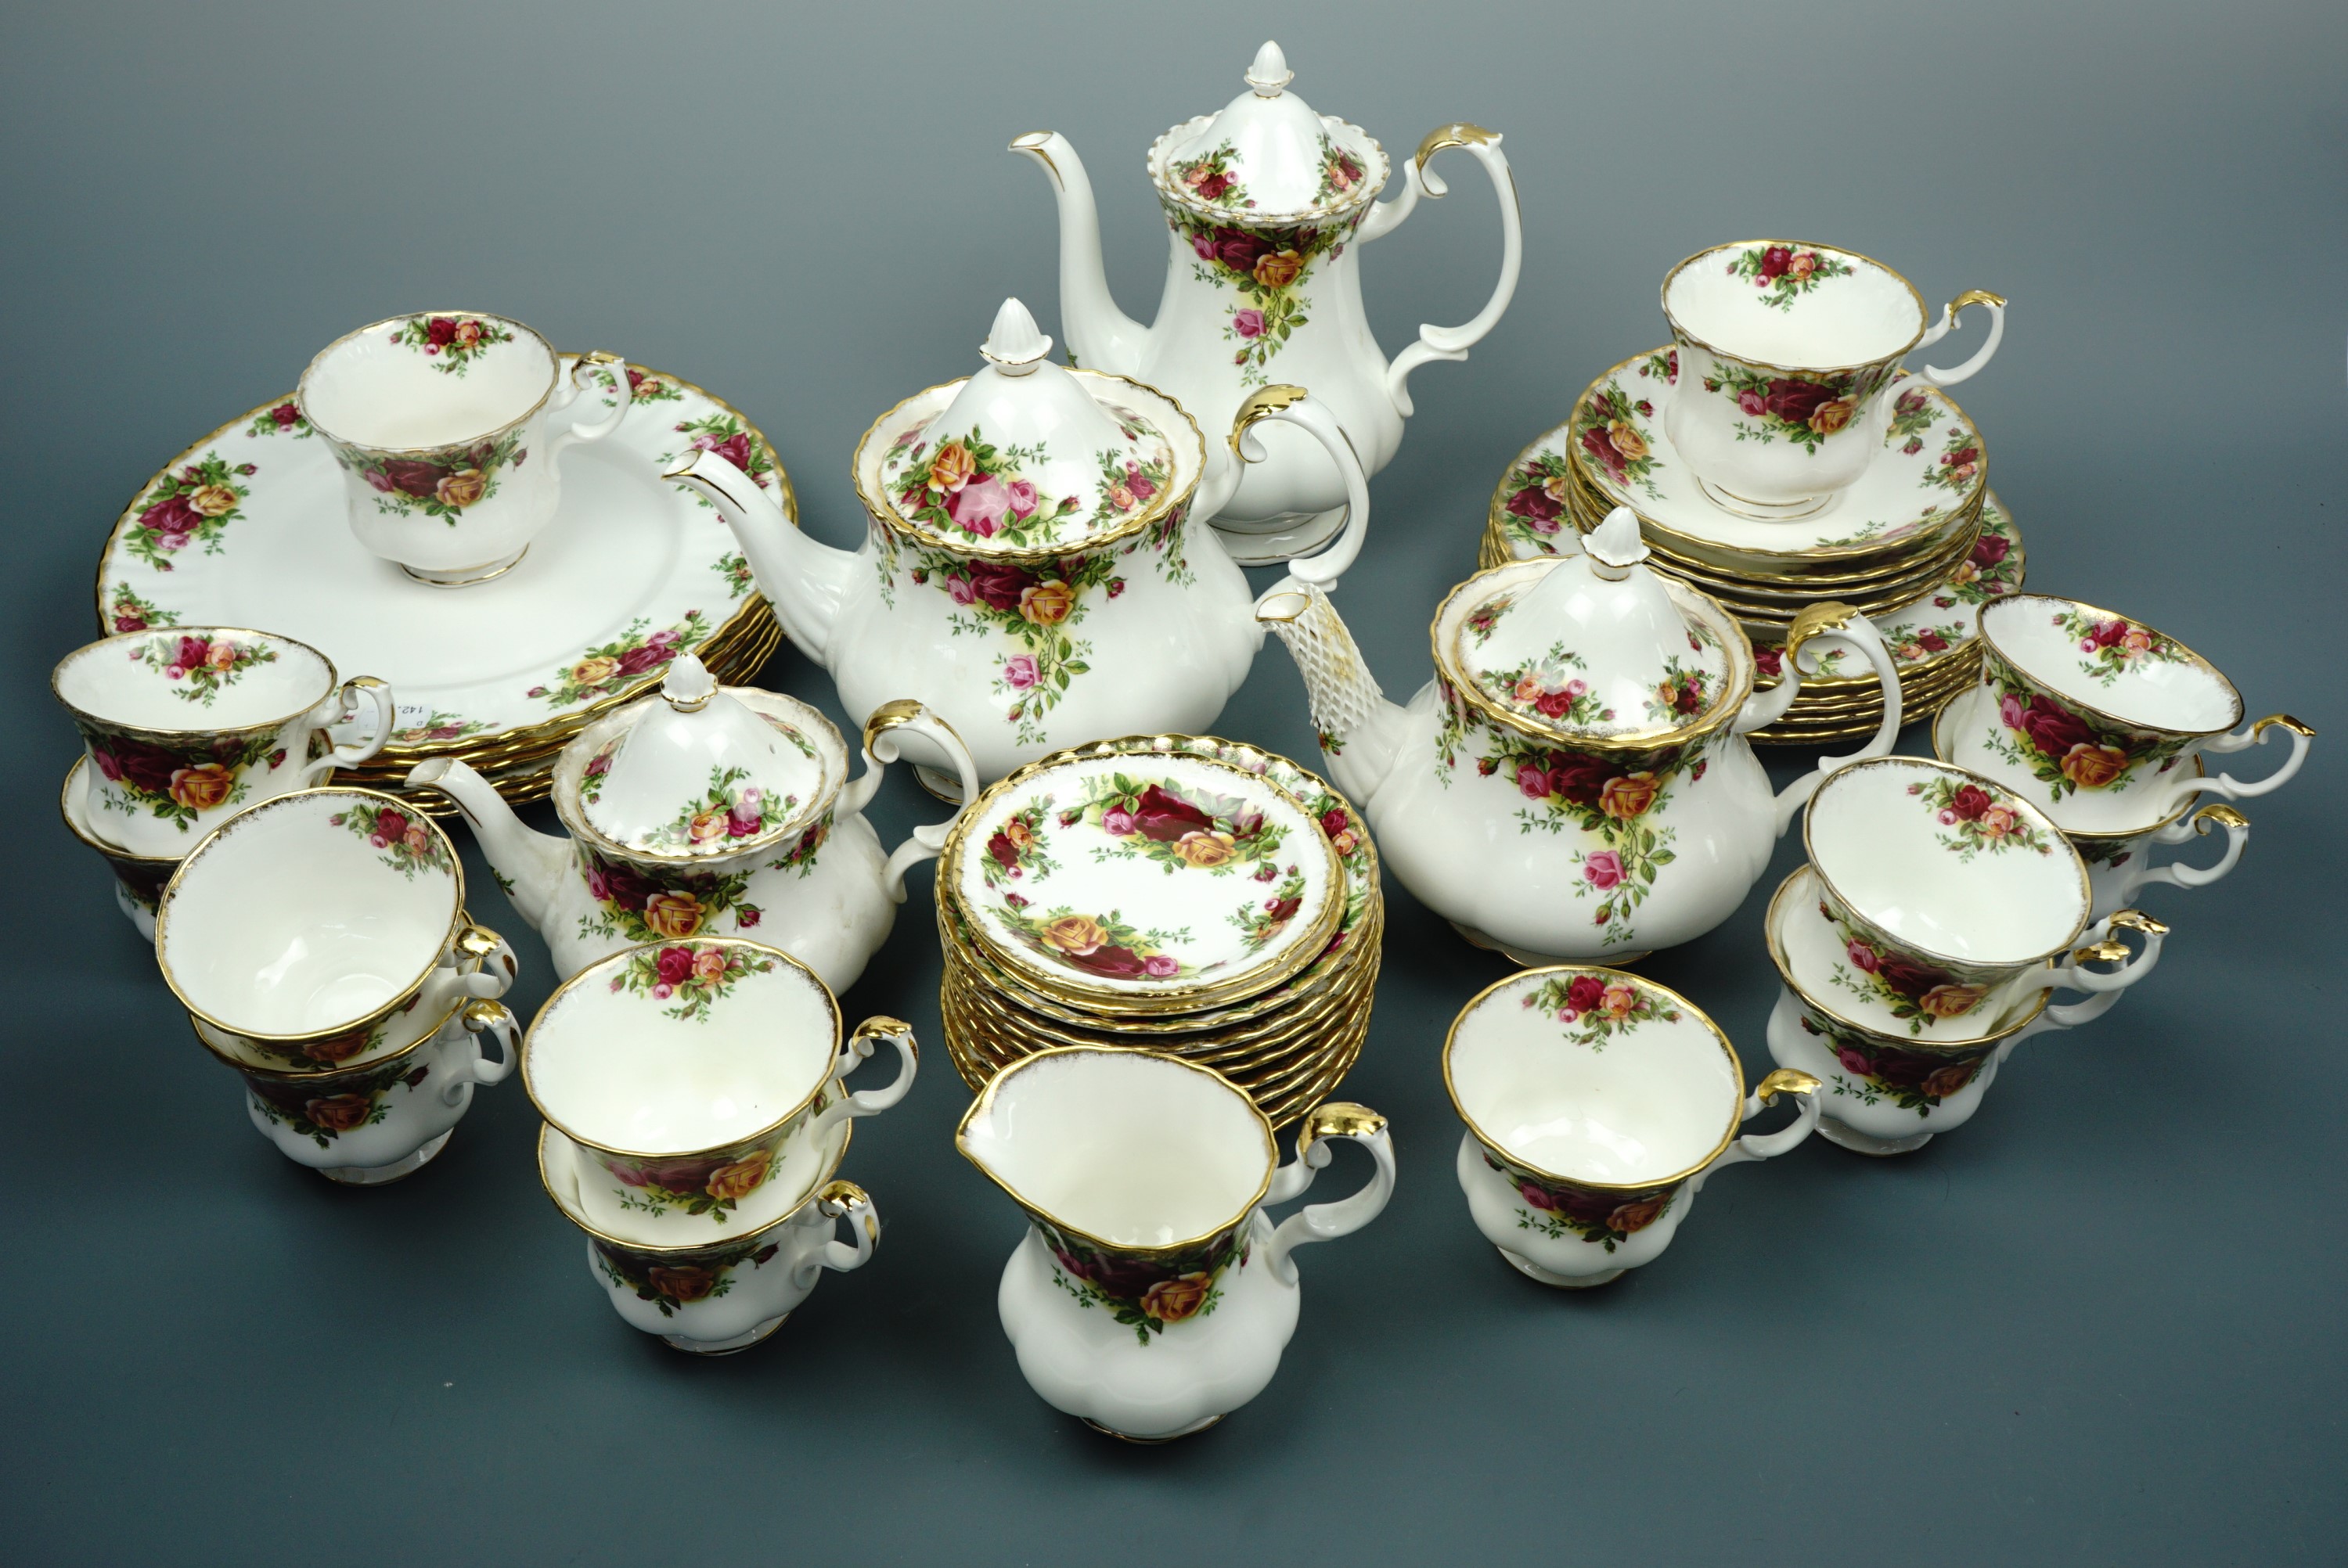 A quantity of Royal Albert Old Country Rose tea and dinnerware, approximately 75 items - Image 3 of 3